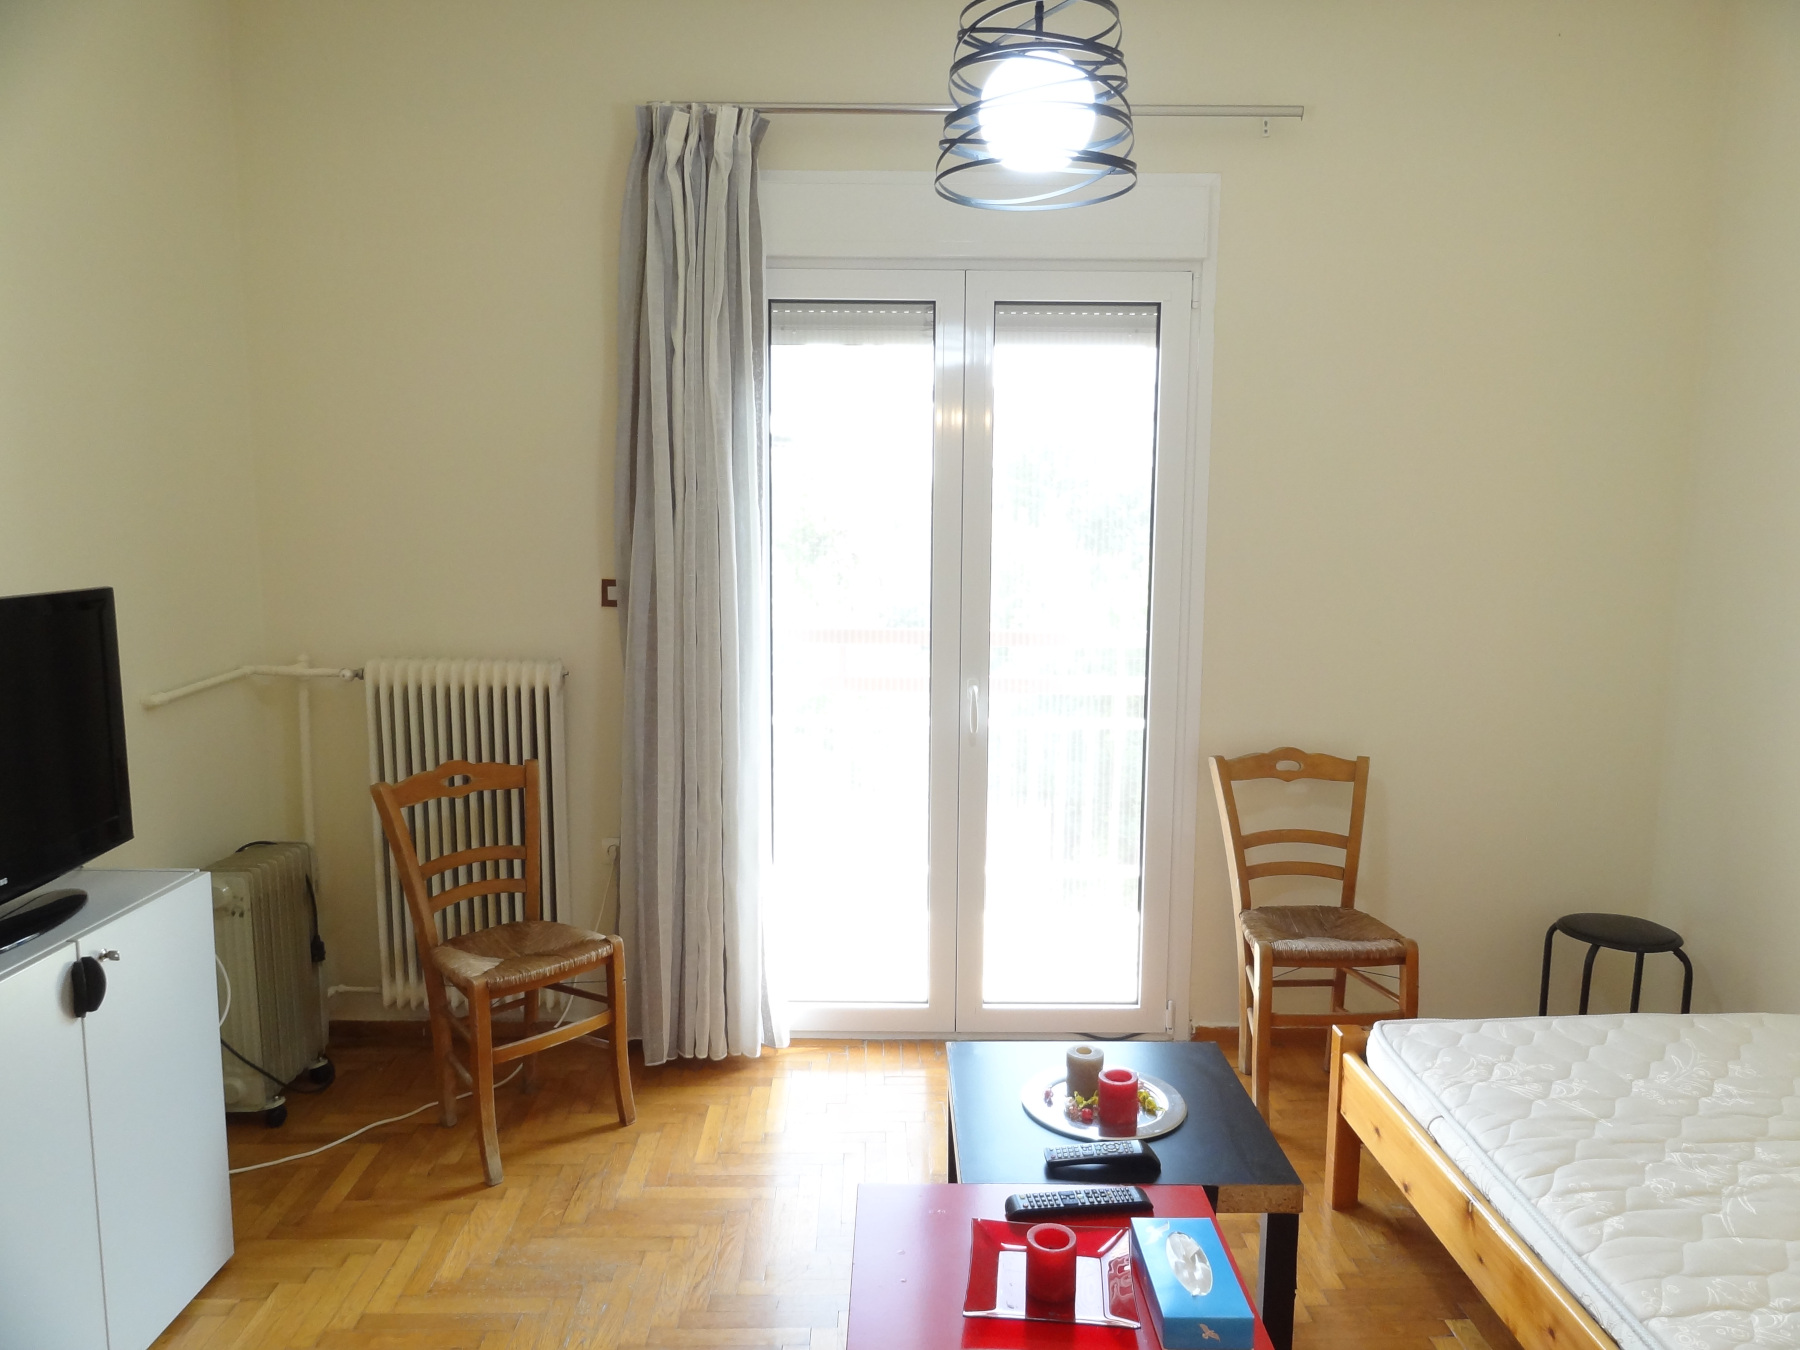 Furnished 1 bedroom apartment for rent, 62 sq.m. 4th floor in the center of Ioannina near X. Trikoupi